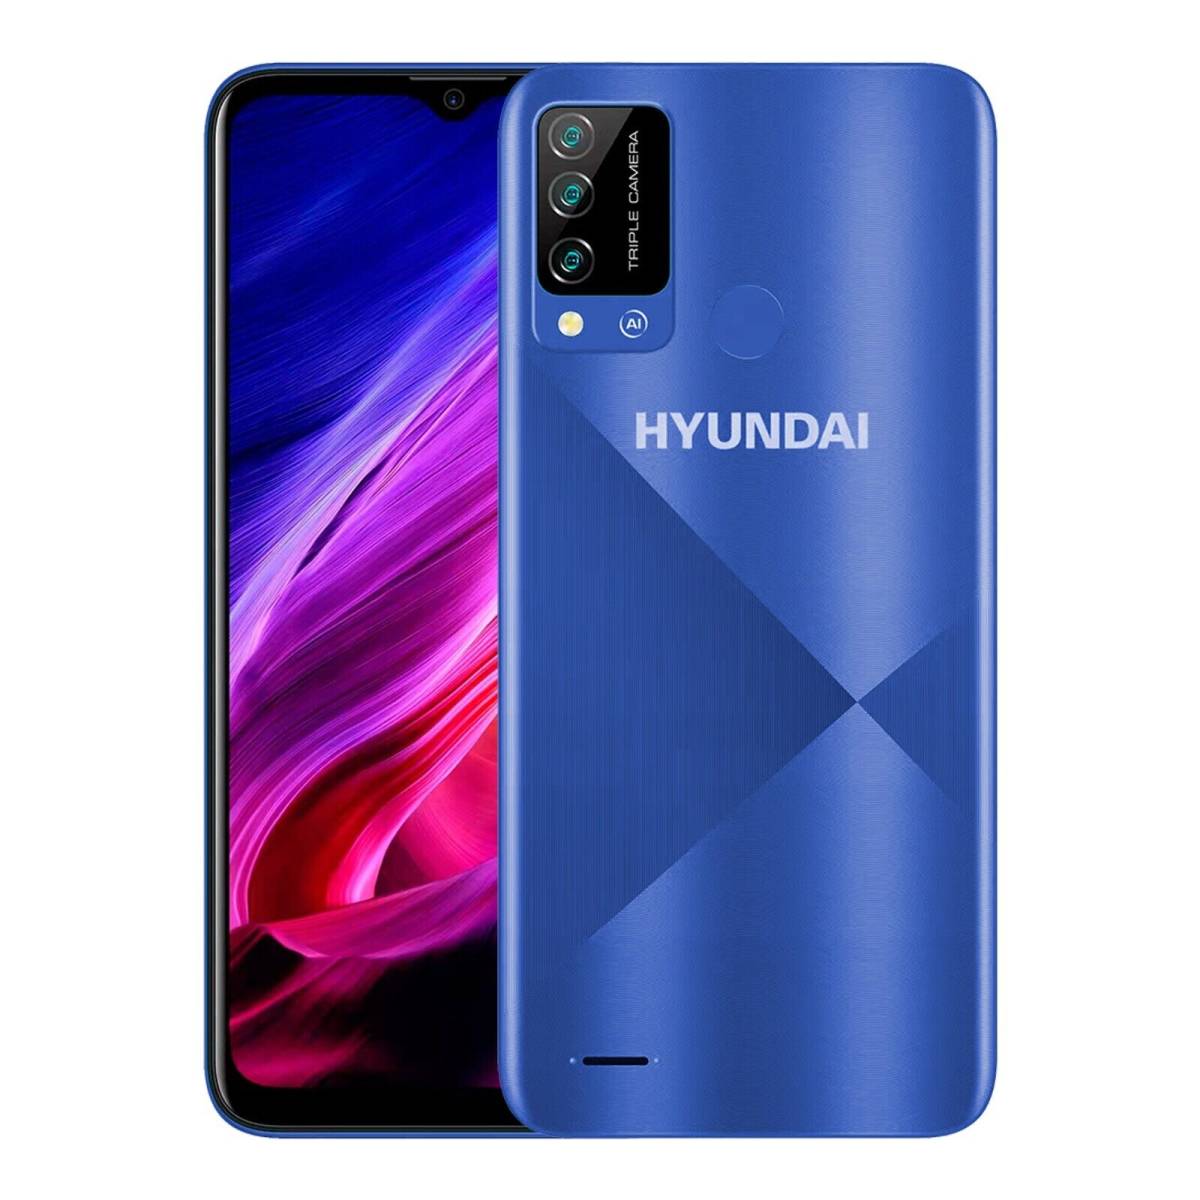 New Hyundai L651 Android factory unlocked 4G LTE, VoLTE 64GB/3RAM Cell Phone BL 海外 即決